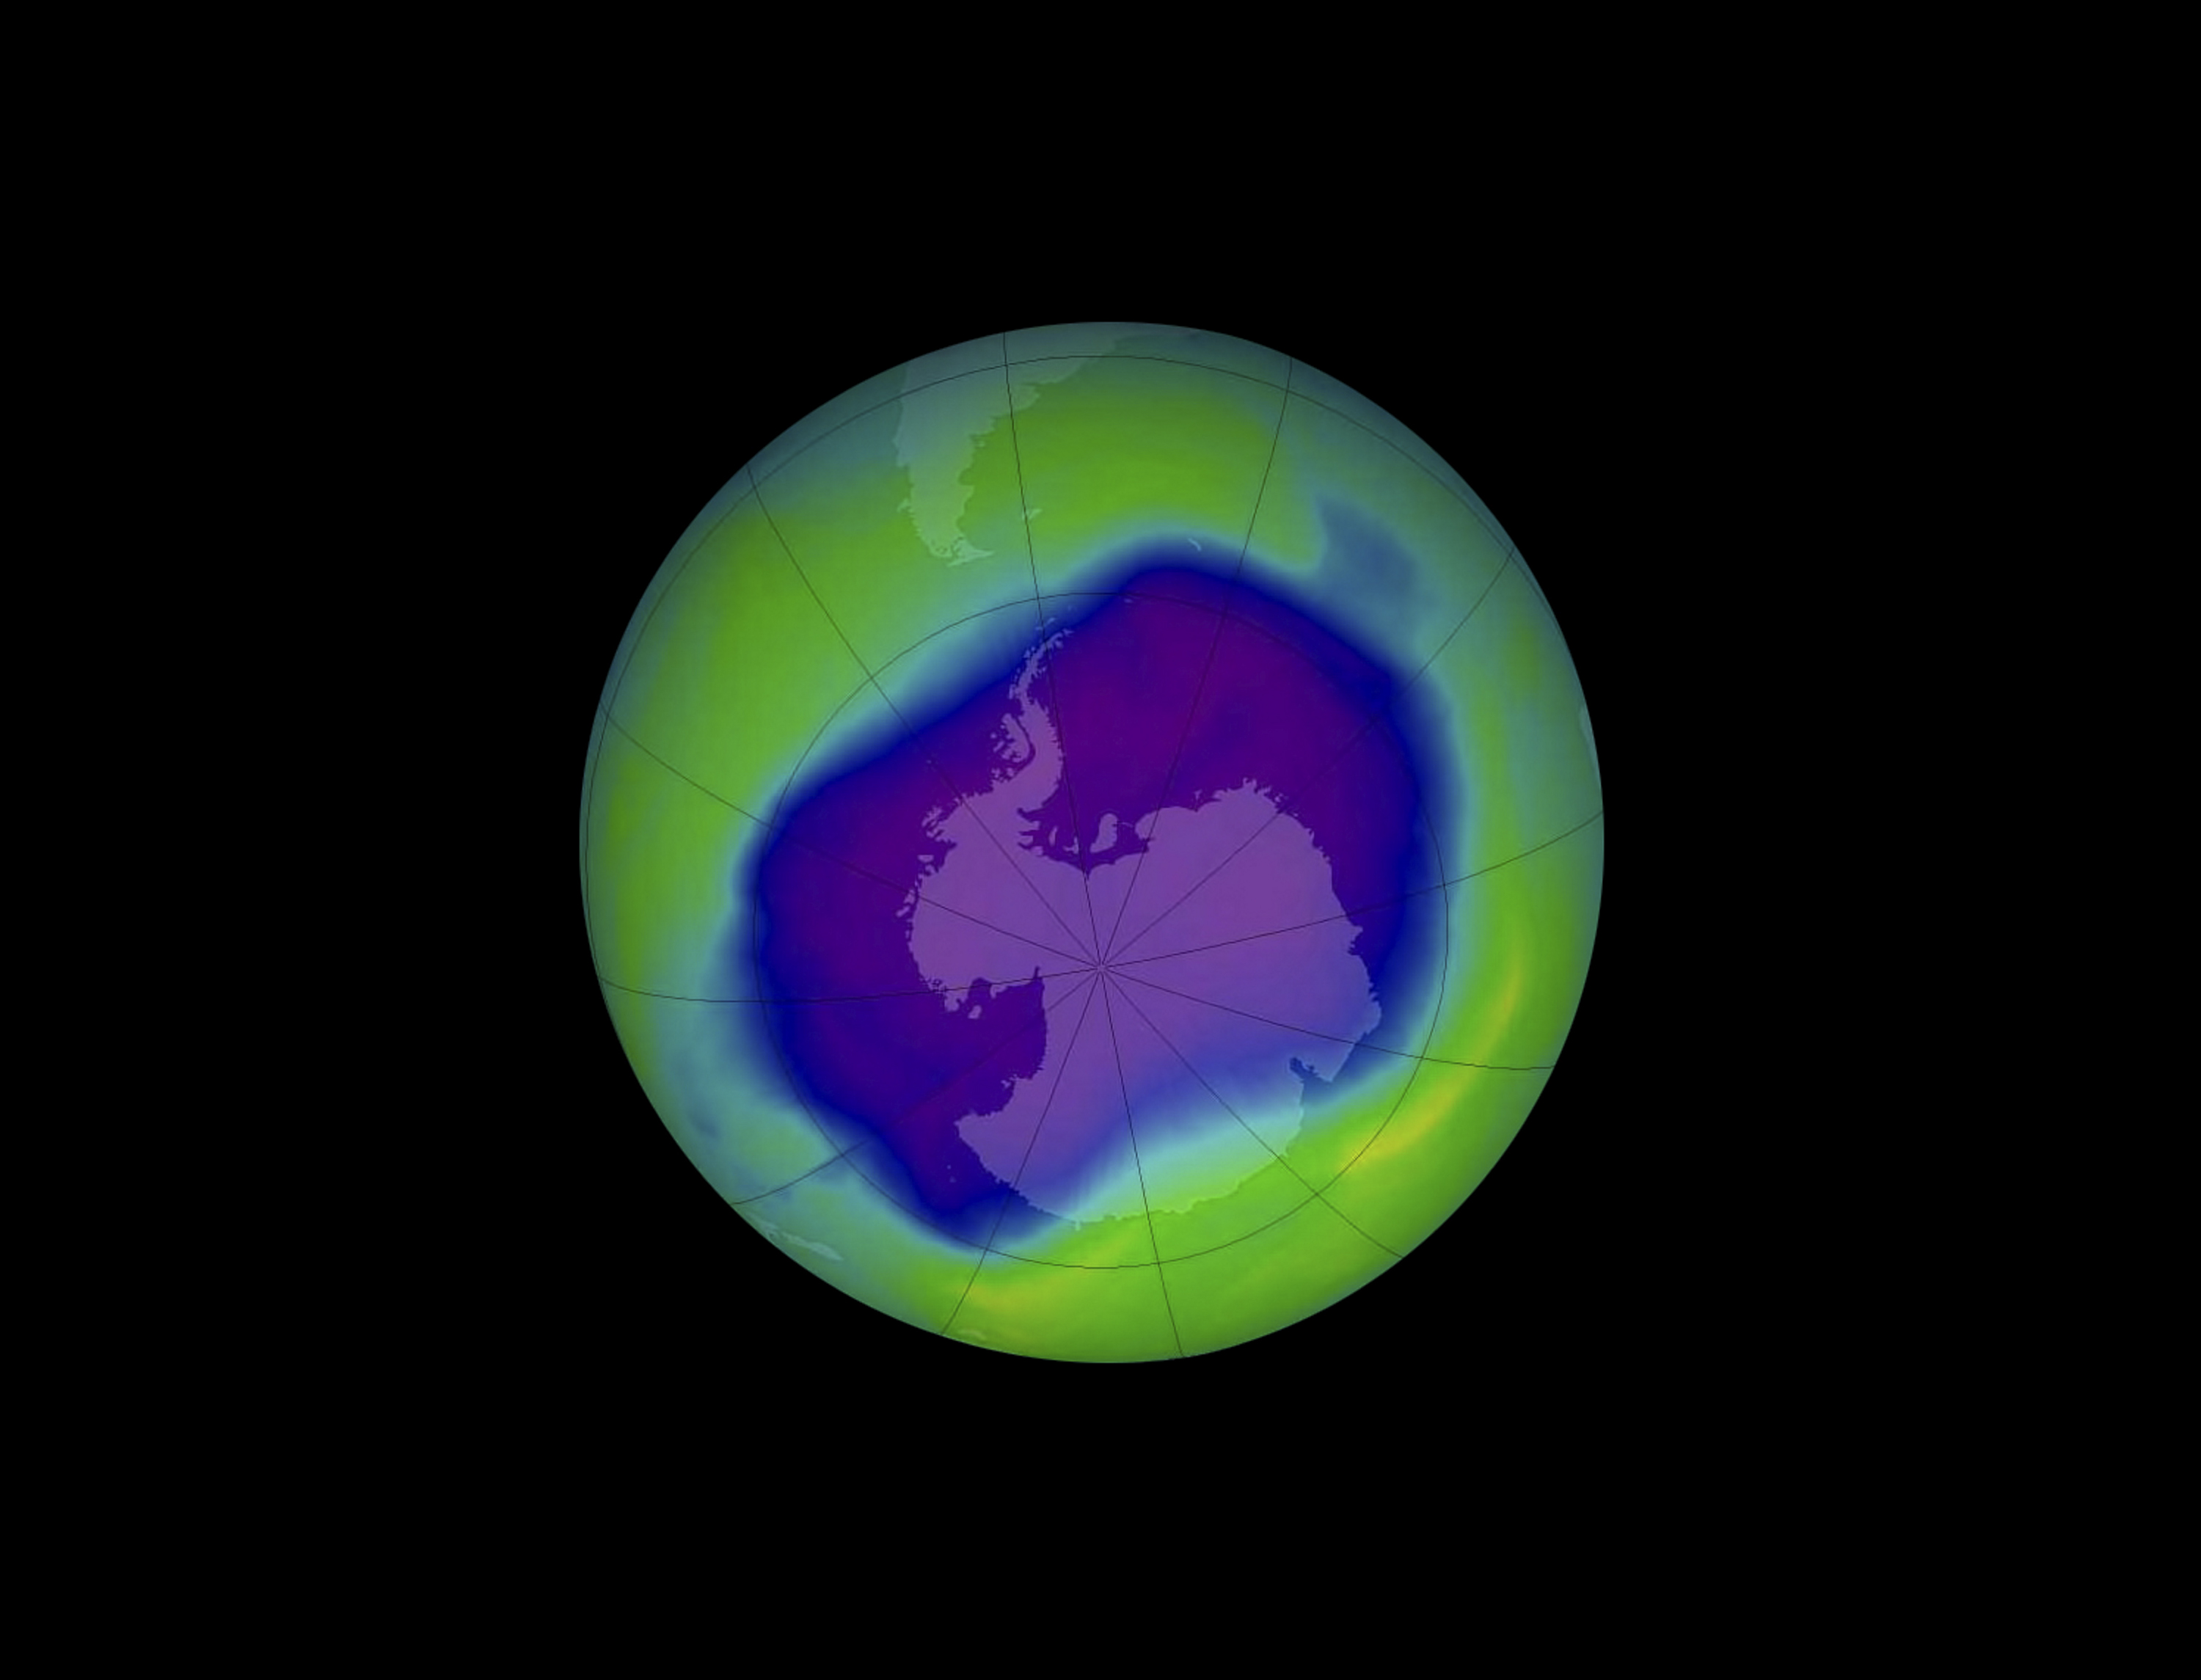 A view of planet Earth showing a purple blotch over the Antarctic representing a hole in the ozone layer of the atmosphere.